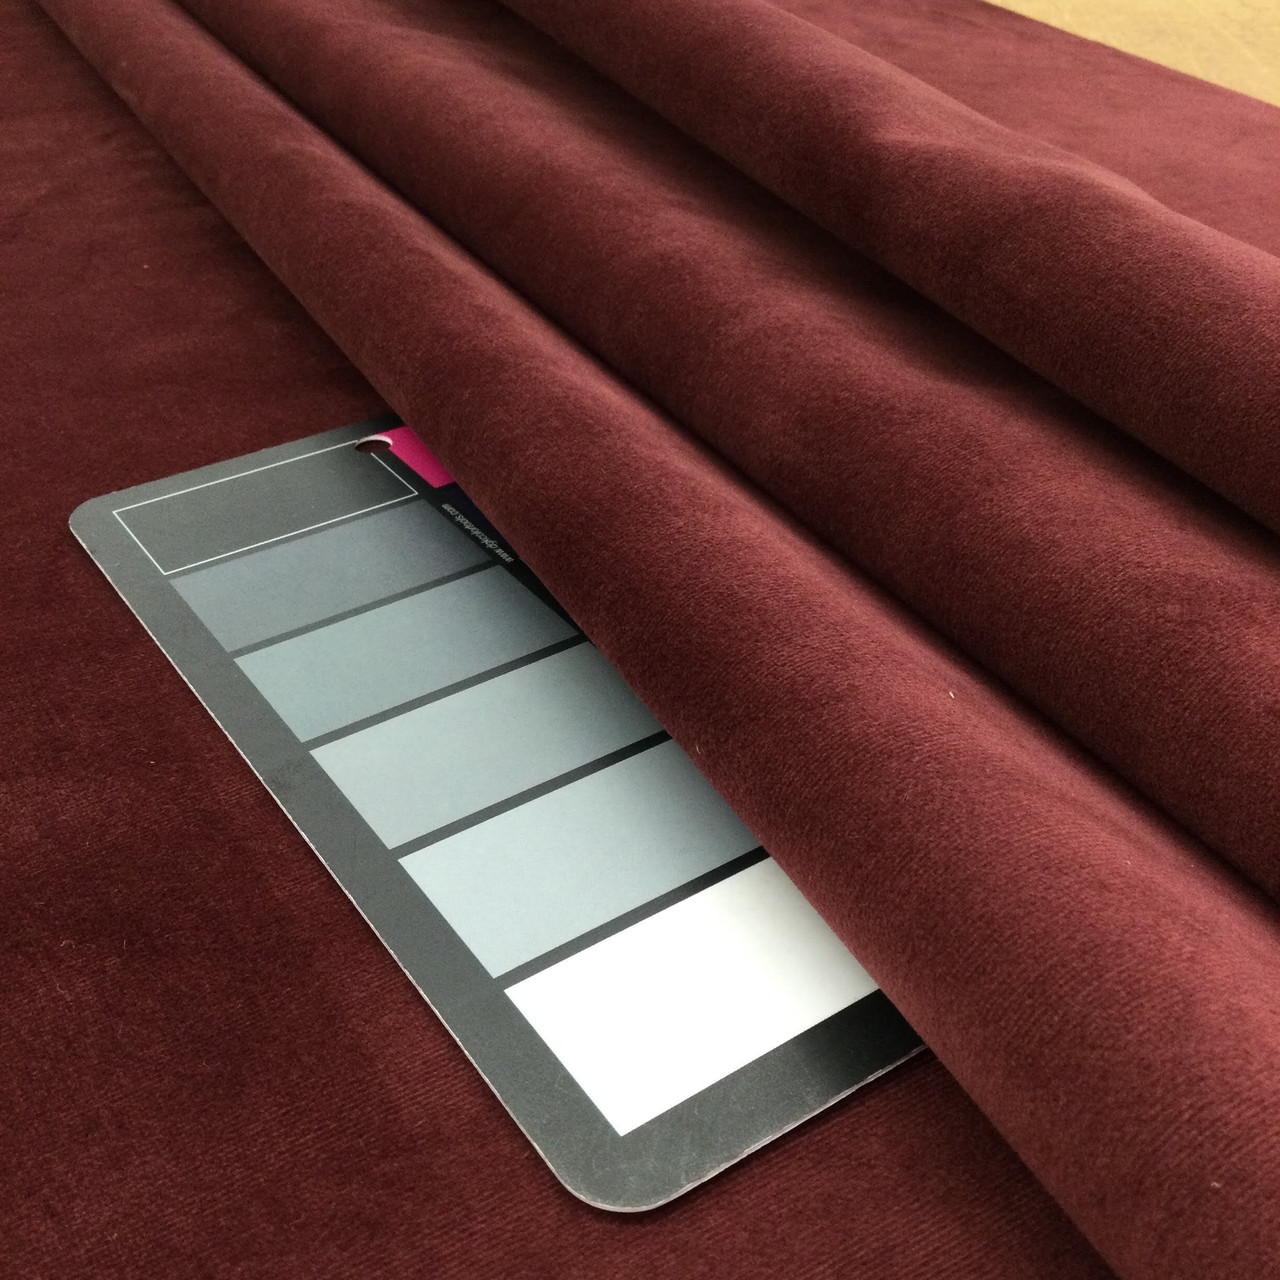 Red Burgundy Solid Texture Velvet Upholstery Fabric by The Yard